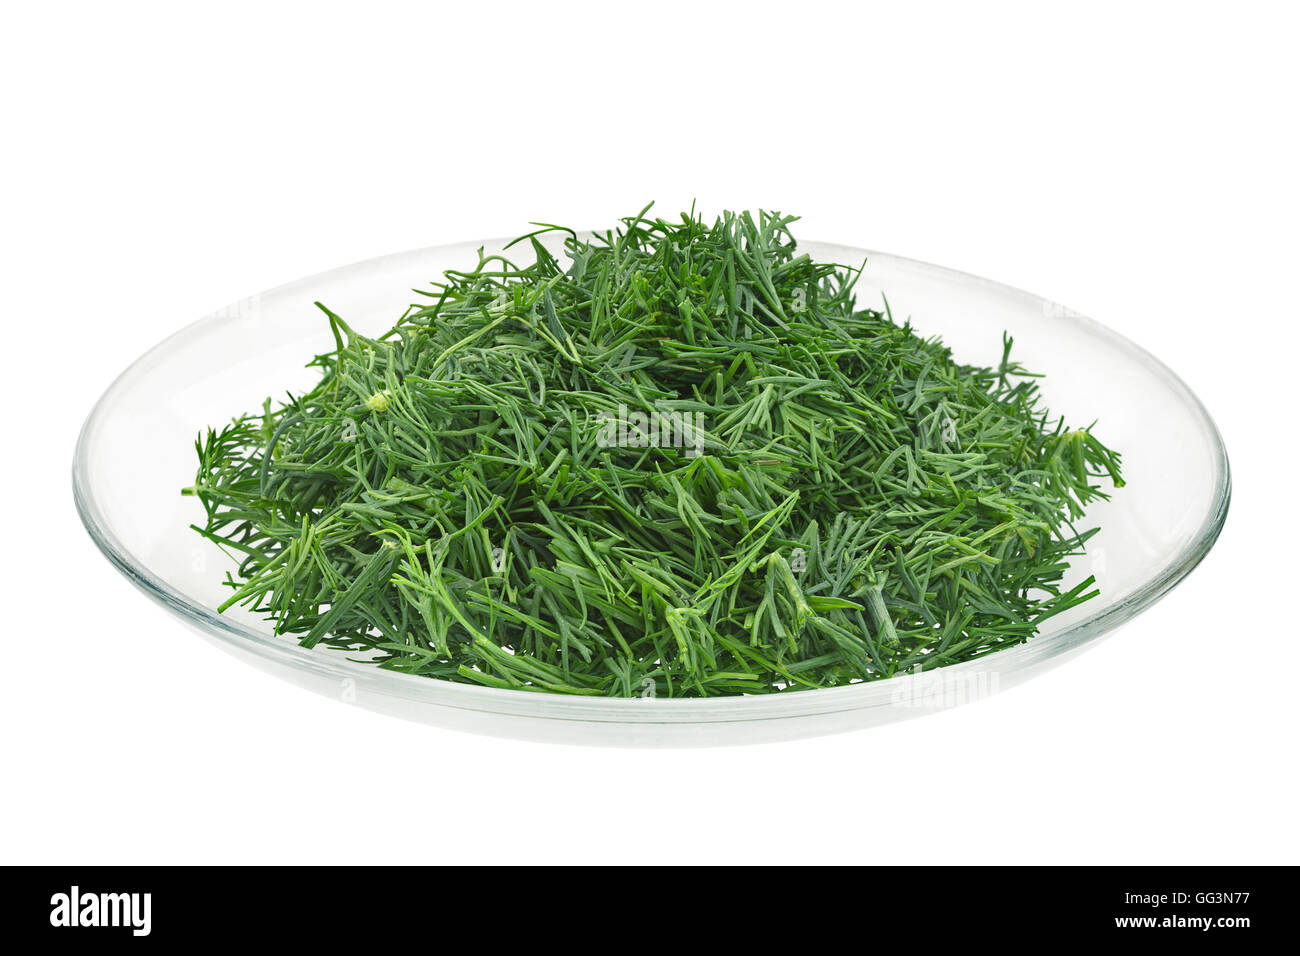 Cooking dill Cut Out Stock Images & Pictures - Page 3 - Alamy